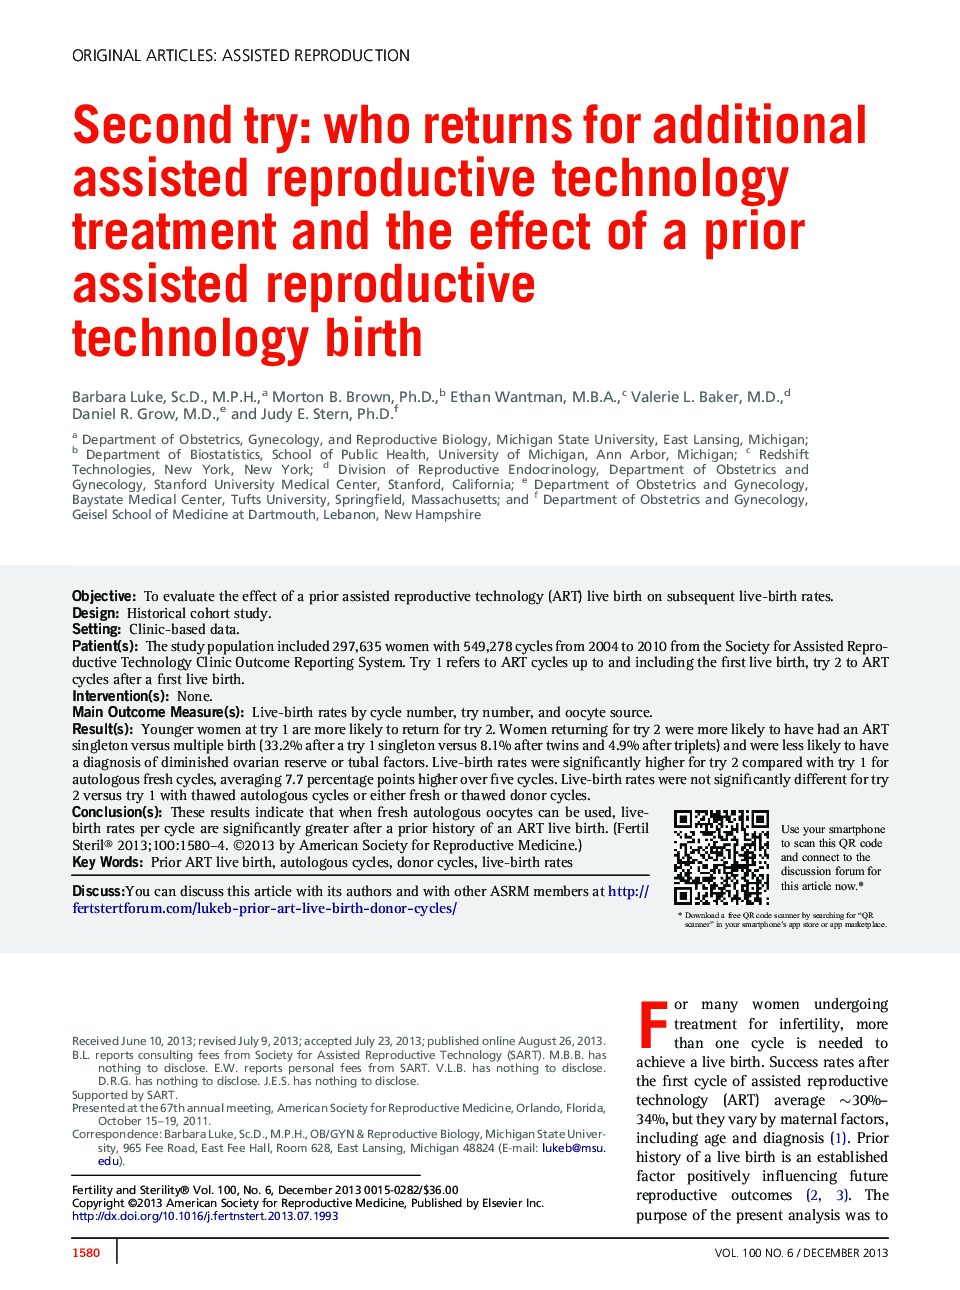 Second try: who returns for additional assisted reproductive technology treatment and the effect of a prior assisted reproductive technology birth 